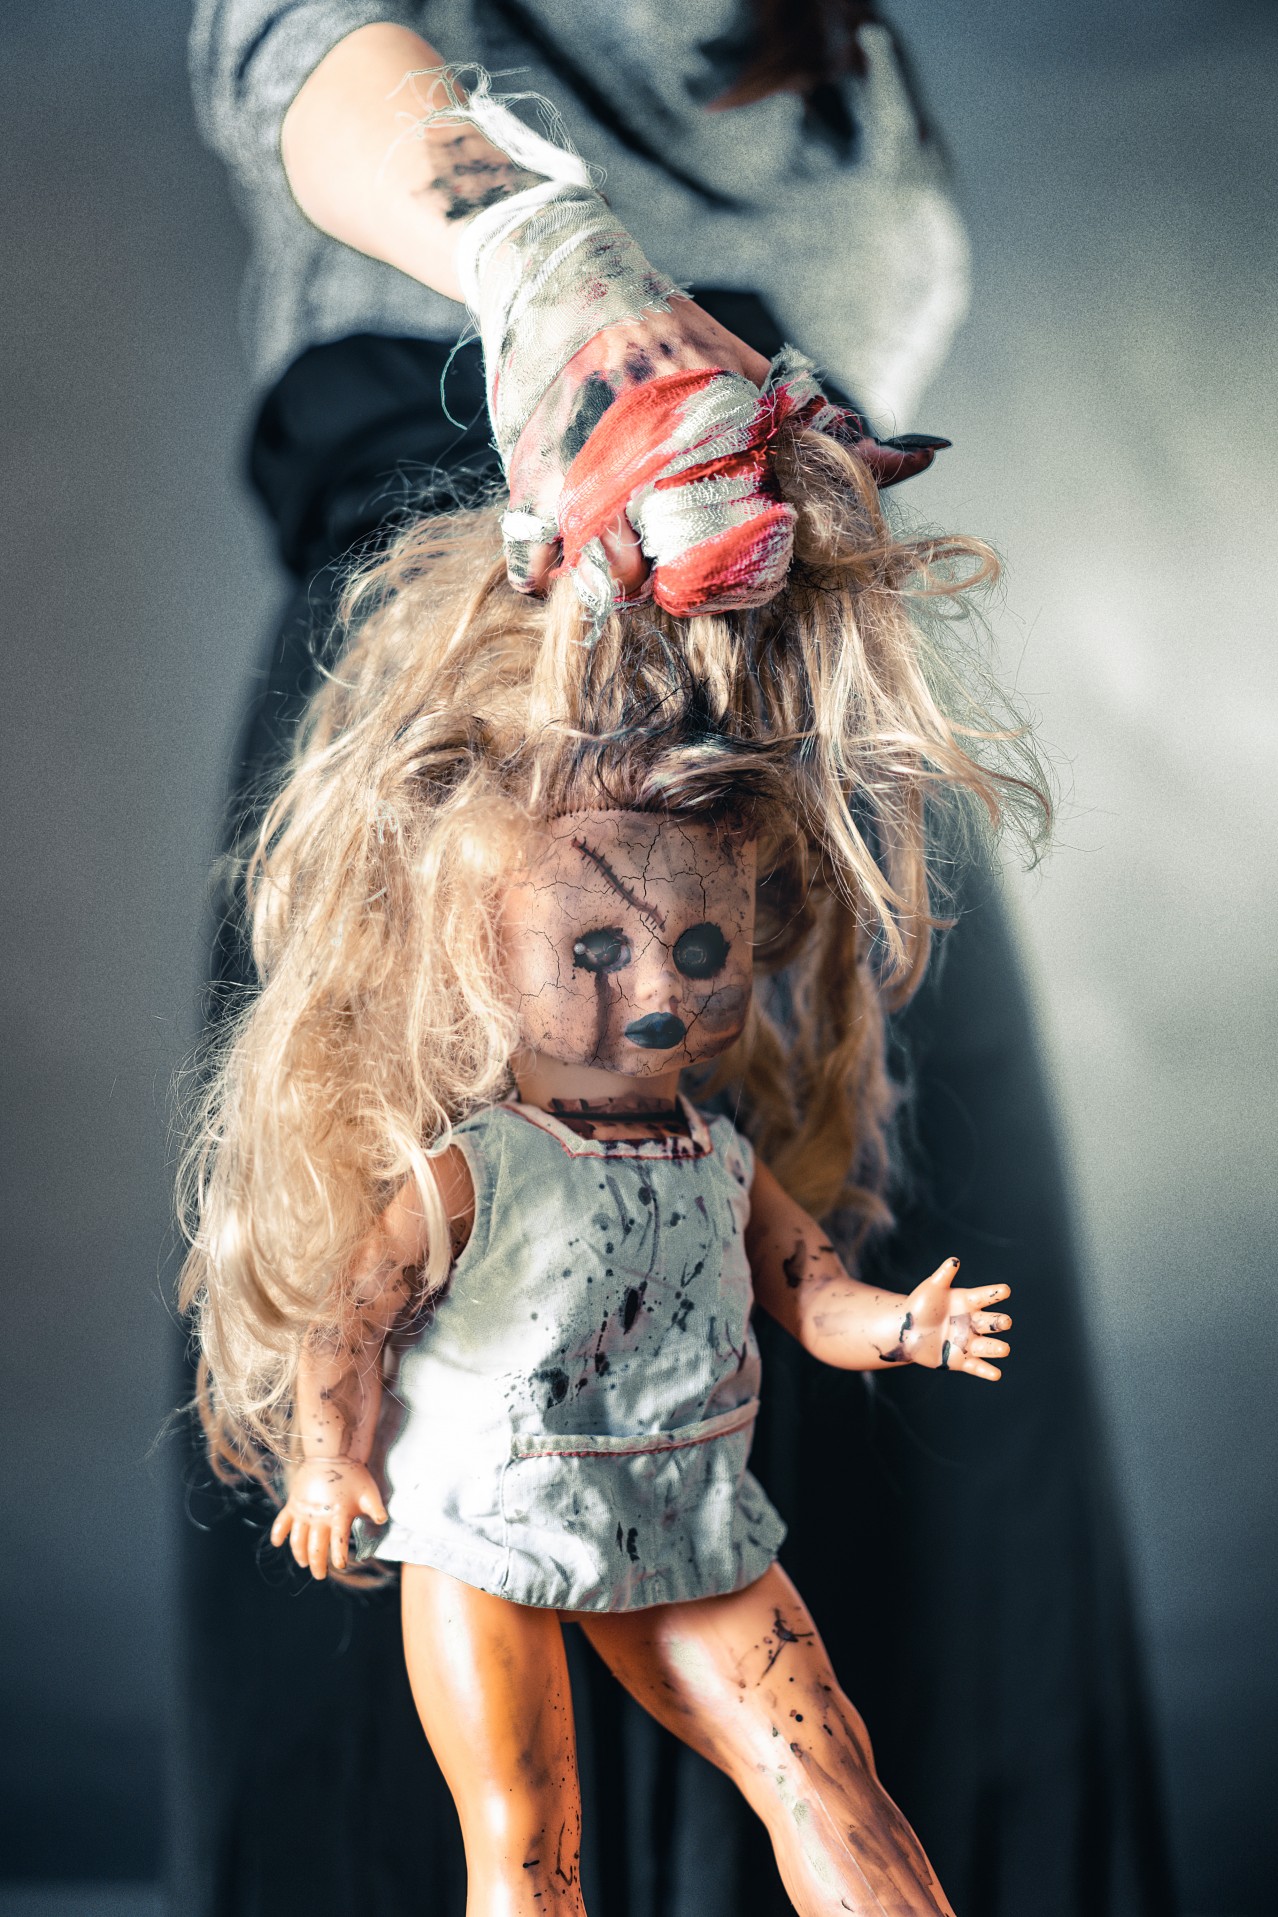 Scary Halloween doll with scars